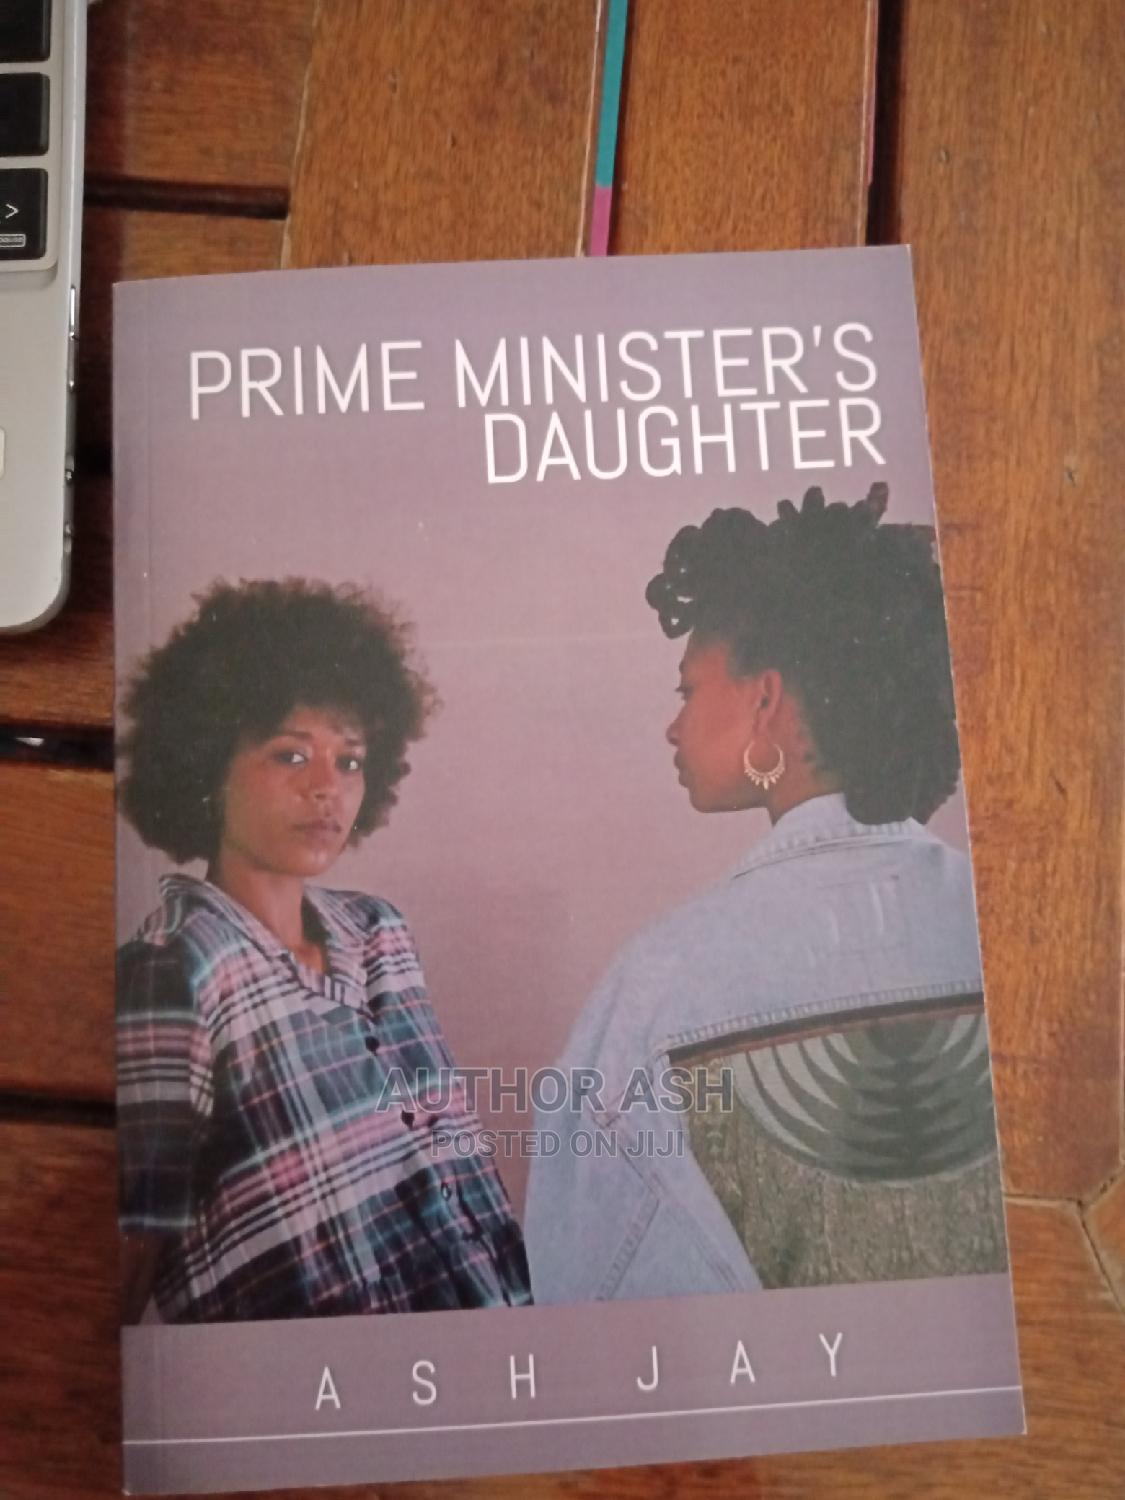 Prime Ministers Daughter by Ash Jay